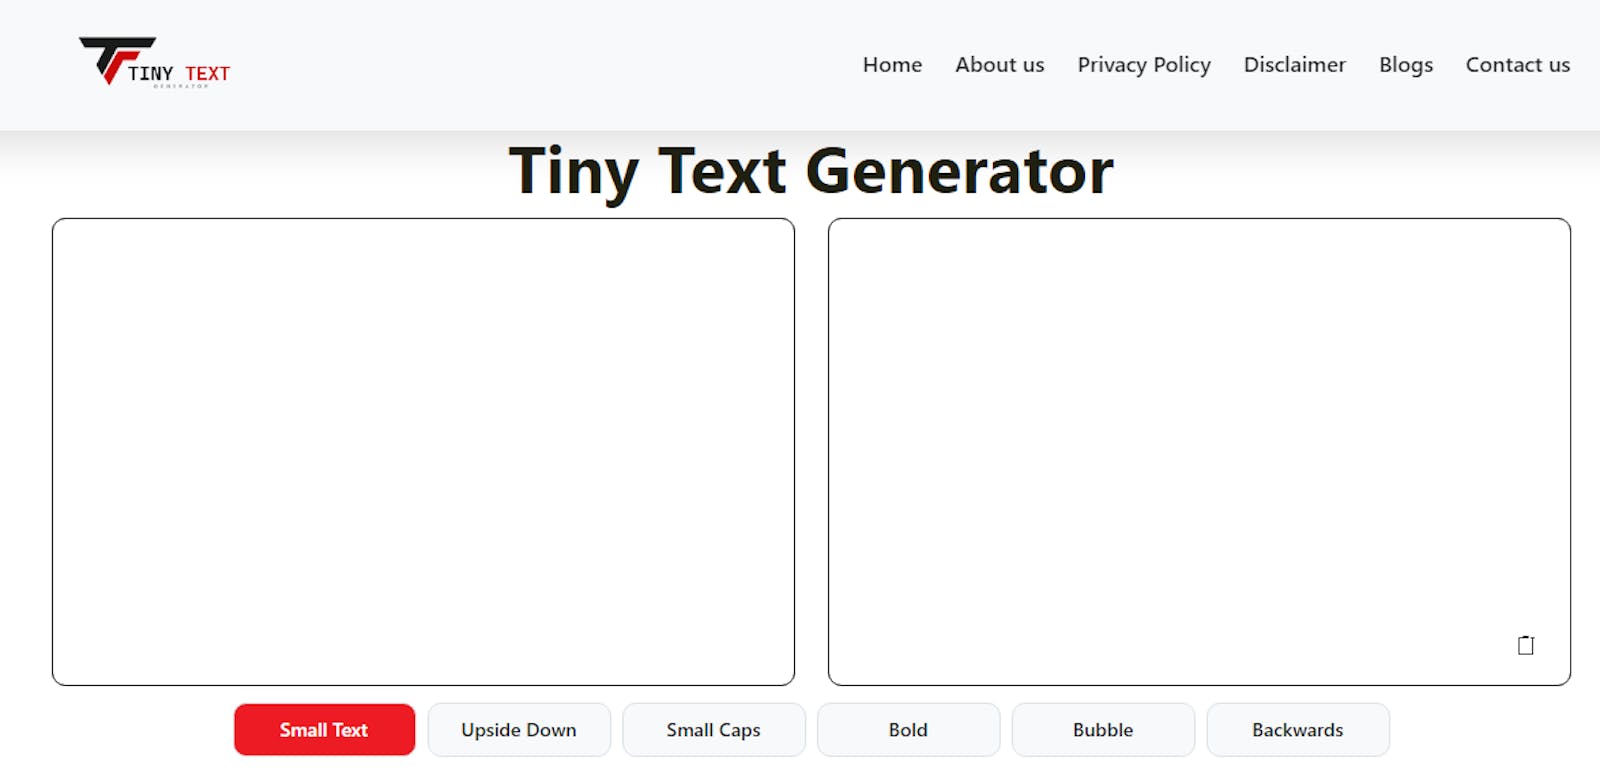 What is Tiny Text Generator